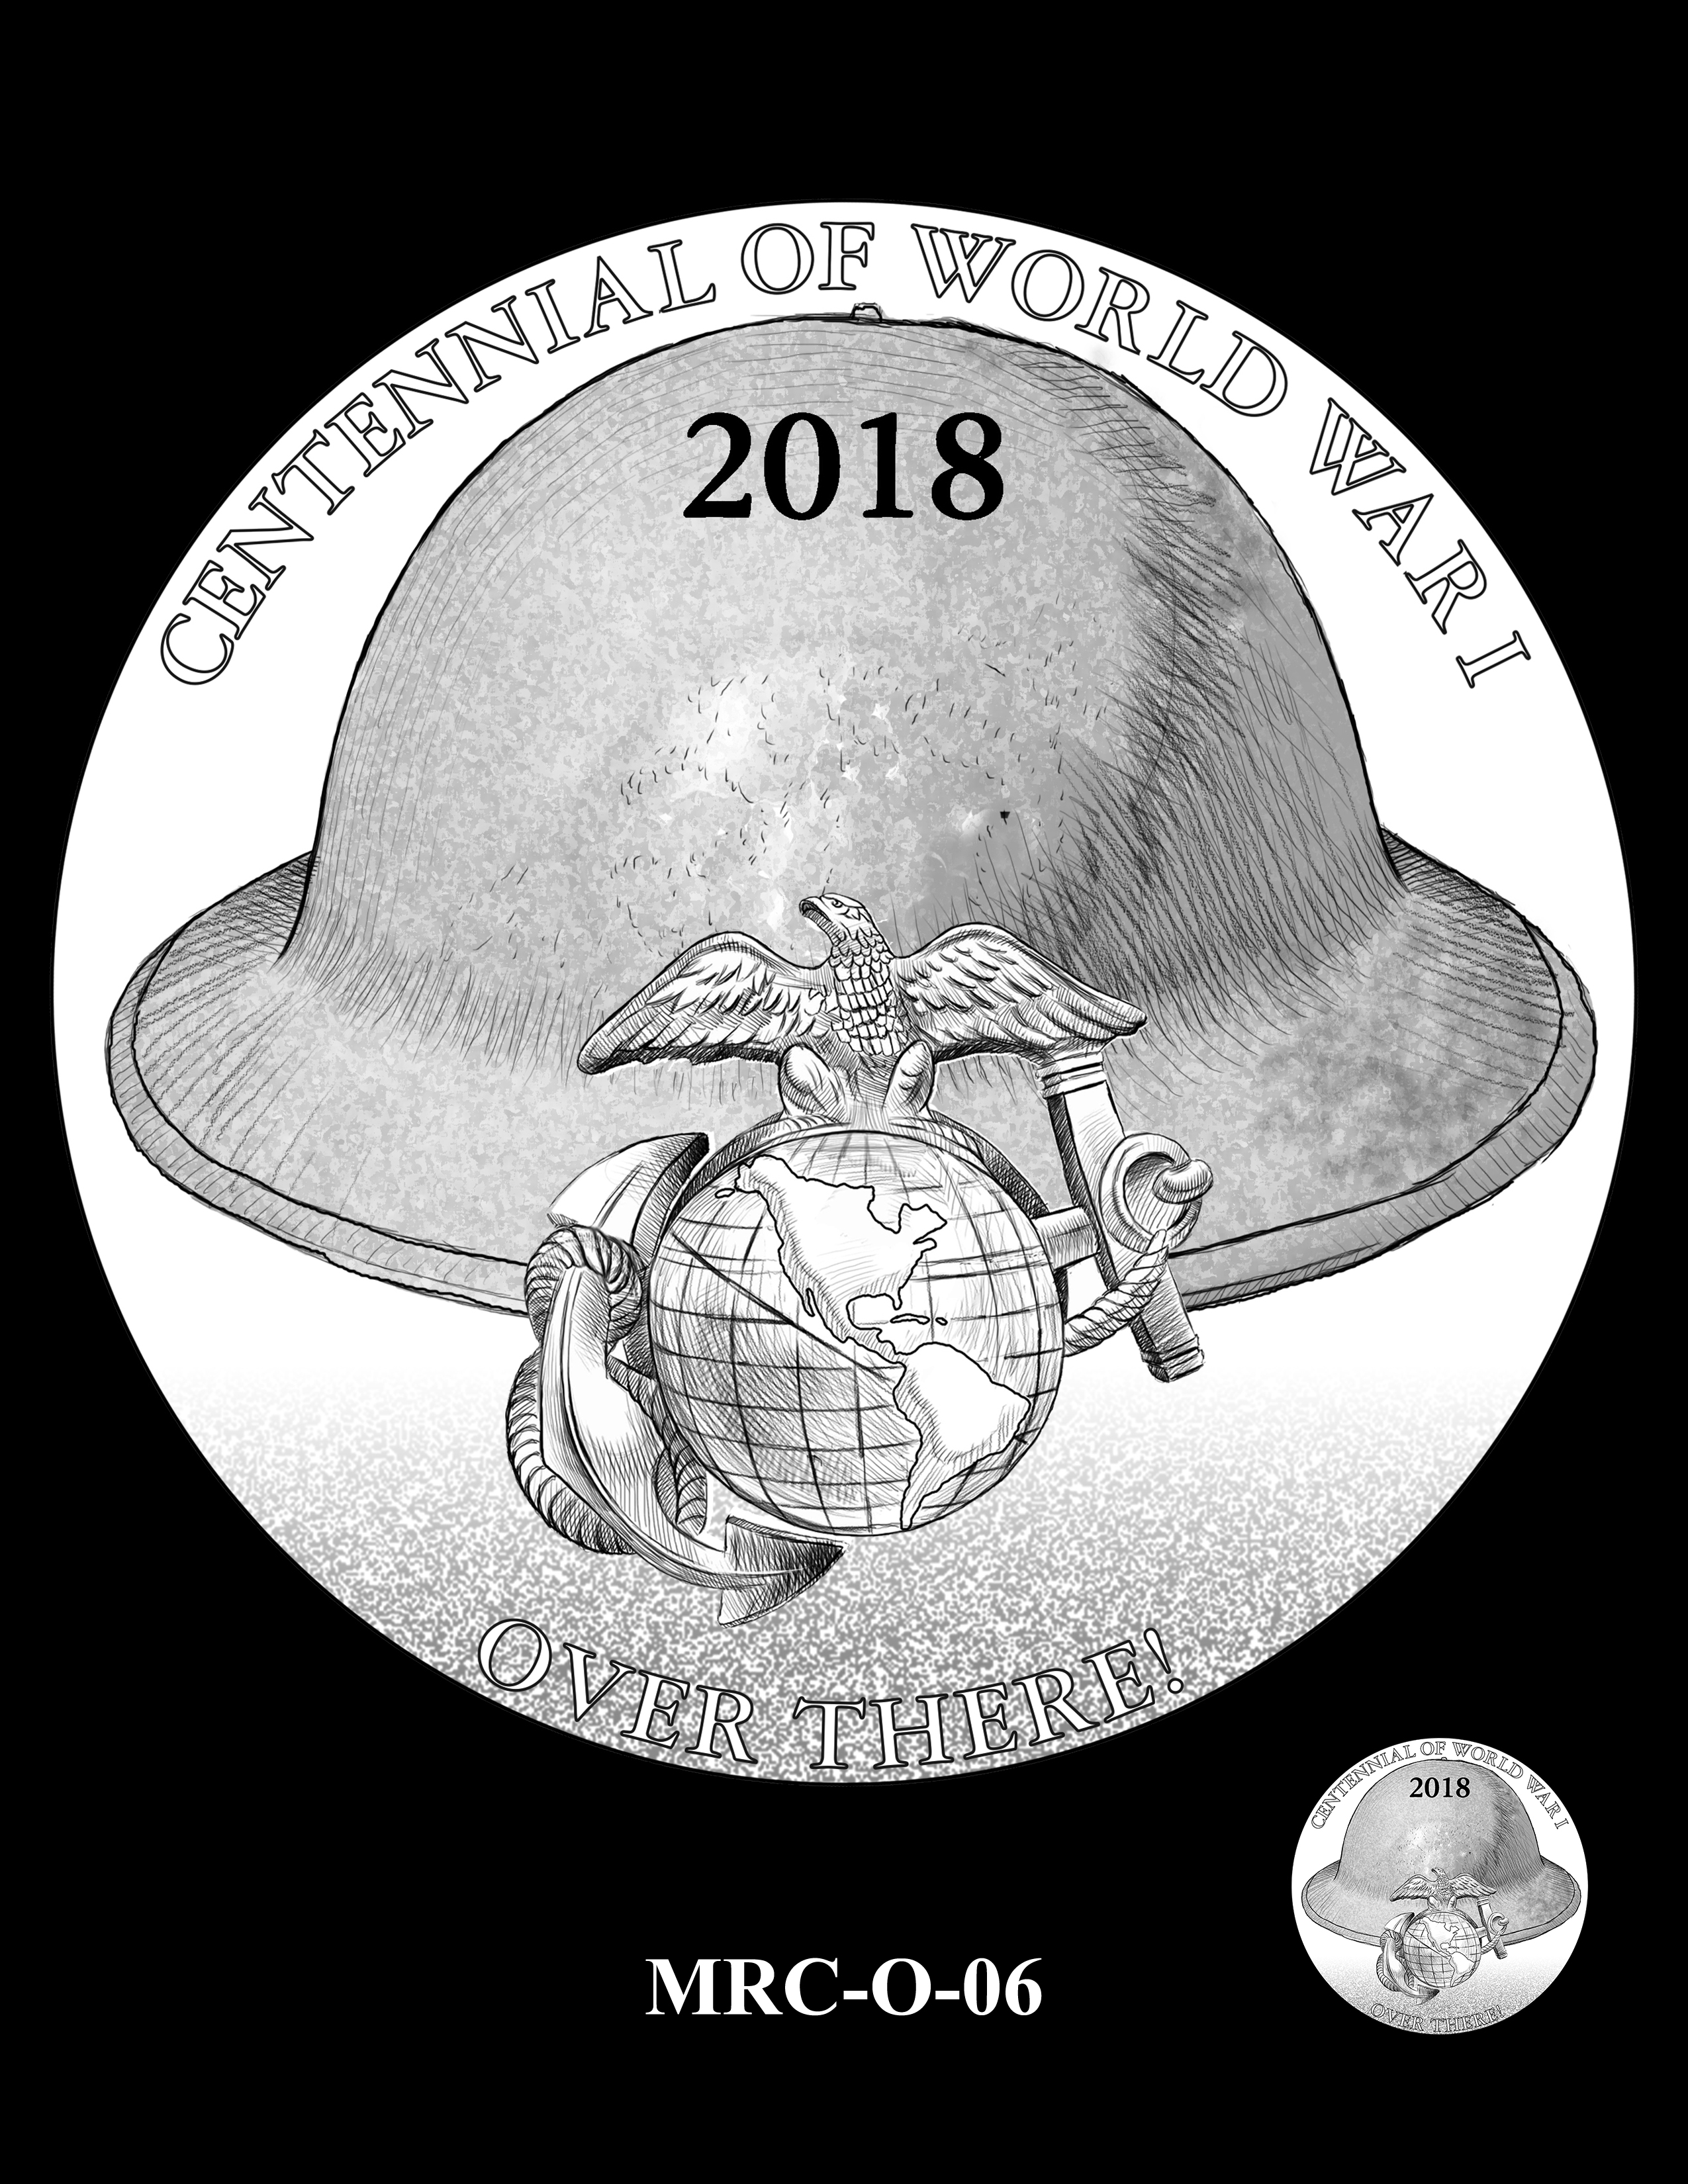 P1-MRC-O-06 -- 2018 World War I Armed Forces Silver Medals - Marine Corps